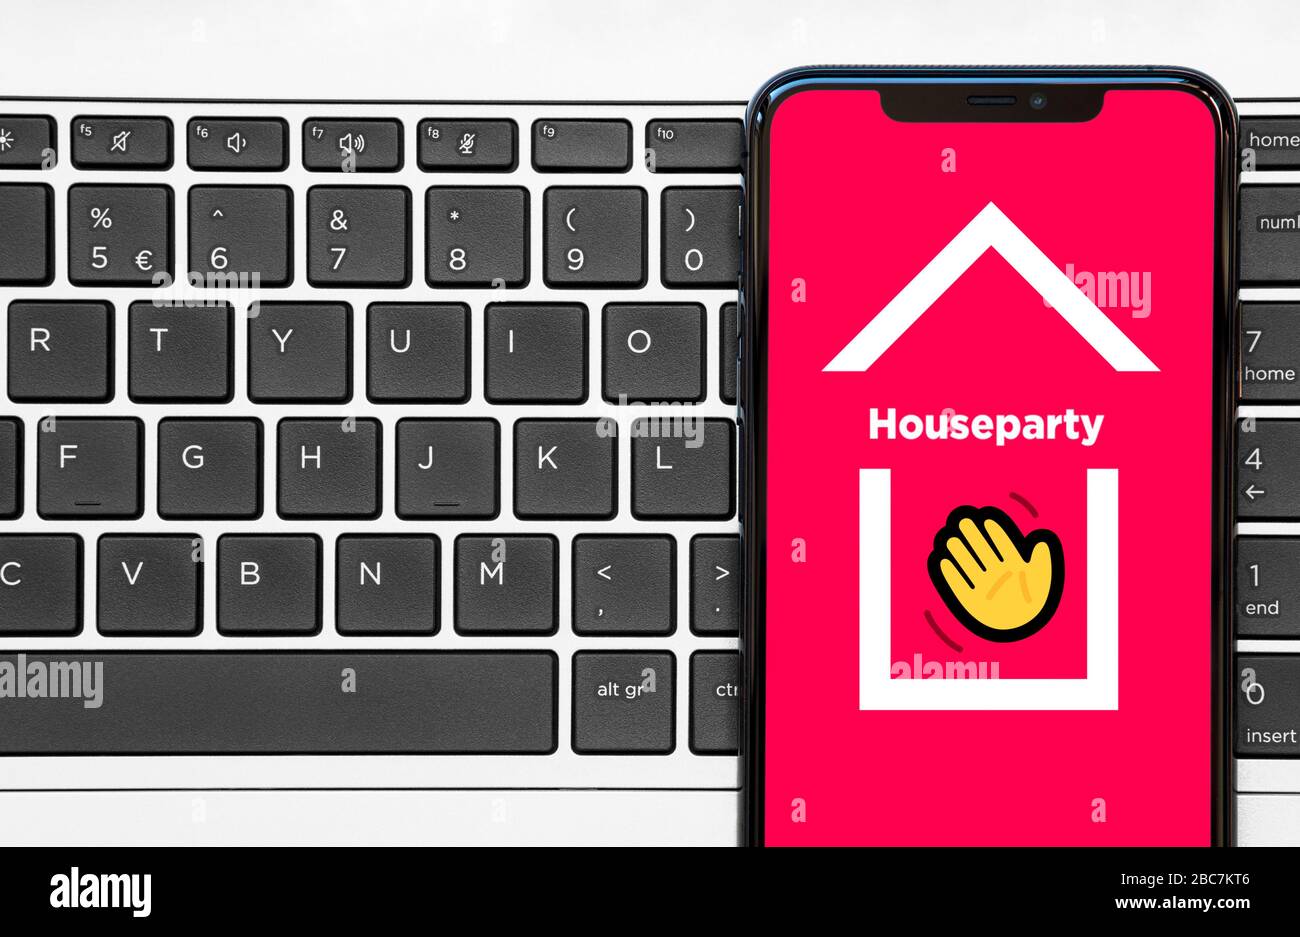 Houseparty App Face-to-Face Social Network be Together during Lockdown or Quarantine. Communication during Coronavirus epidemic concept. Stock Photo